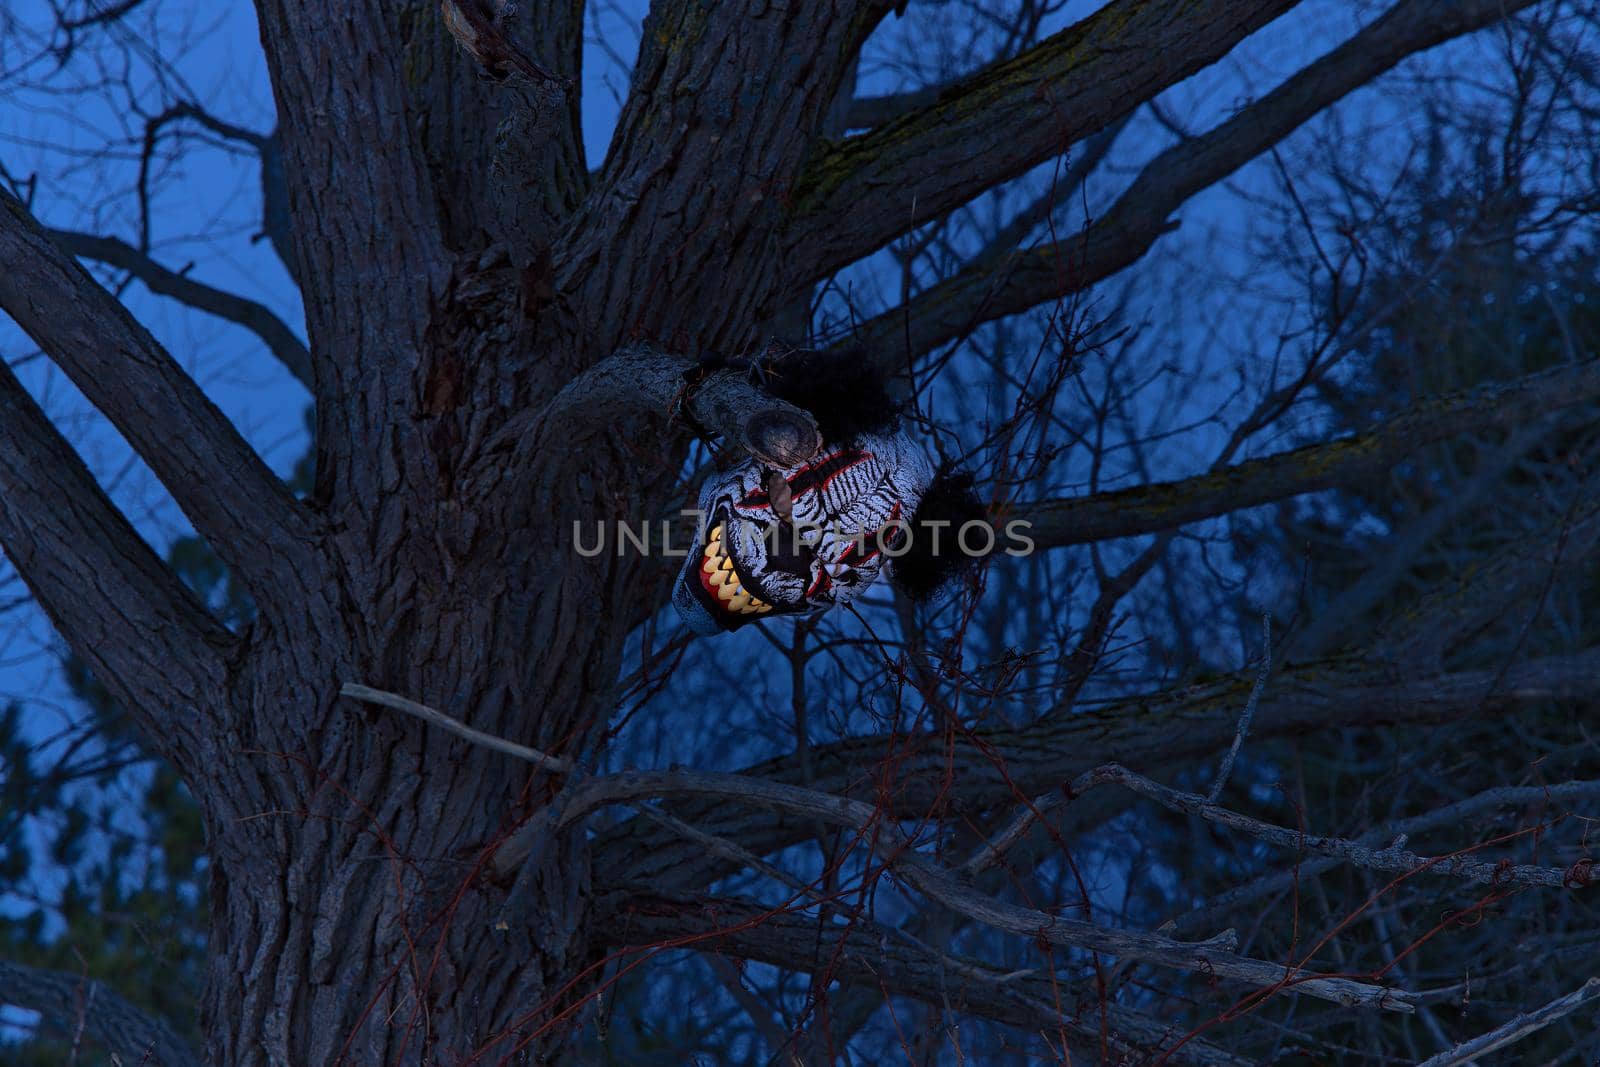 Terrifying Scary Clown Mask with Large Fangs Glows in a Spooky Tree with at Twilight or Night. High quality photo